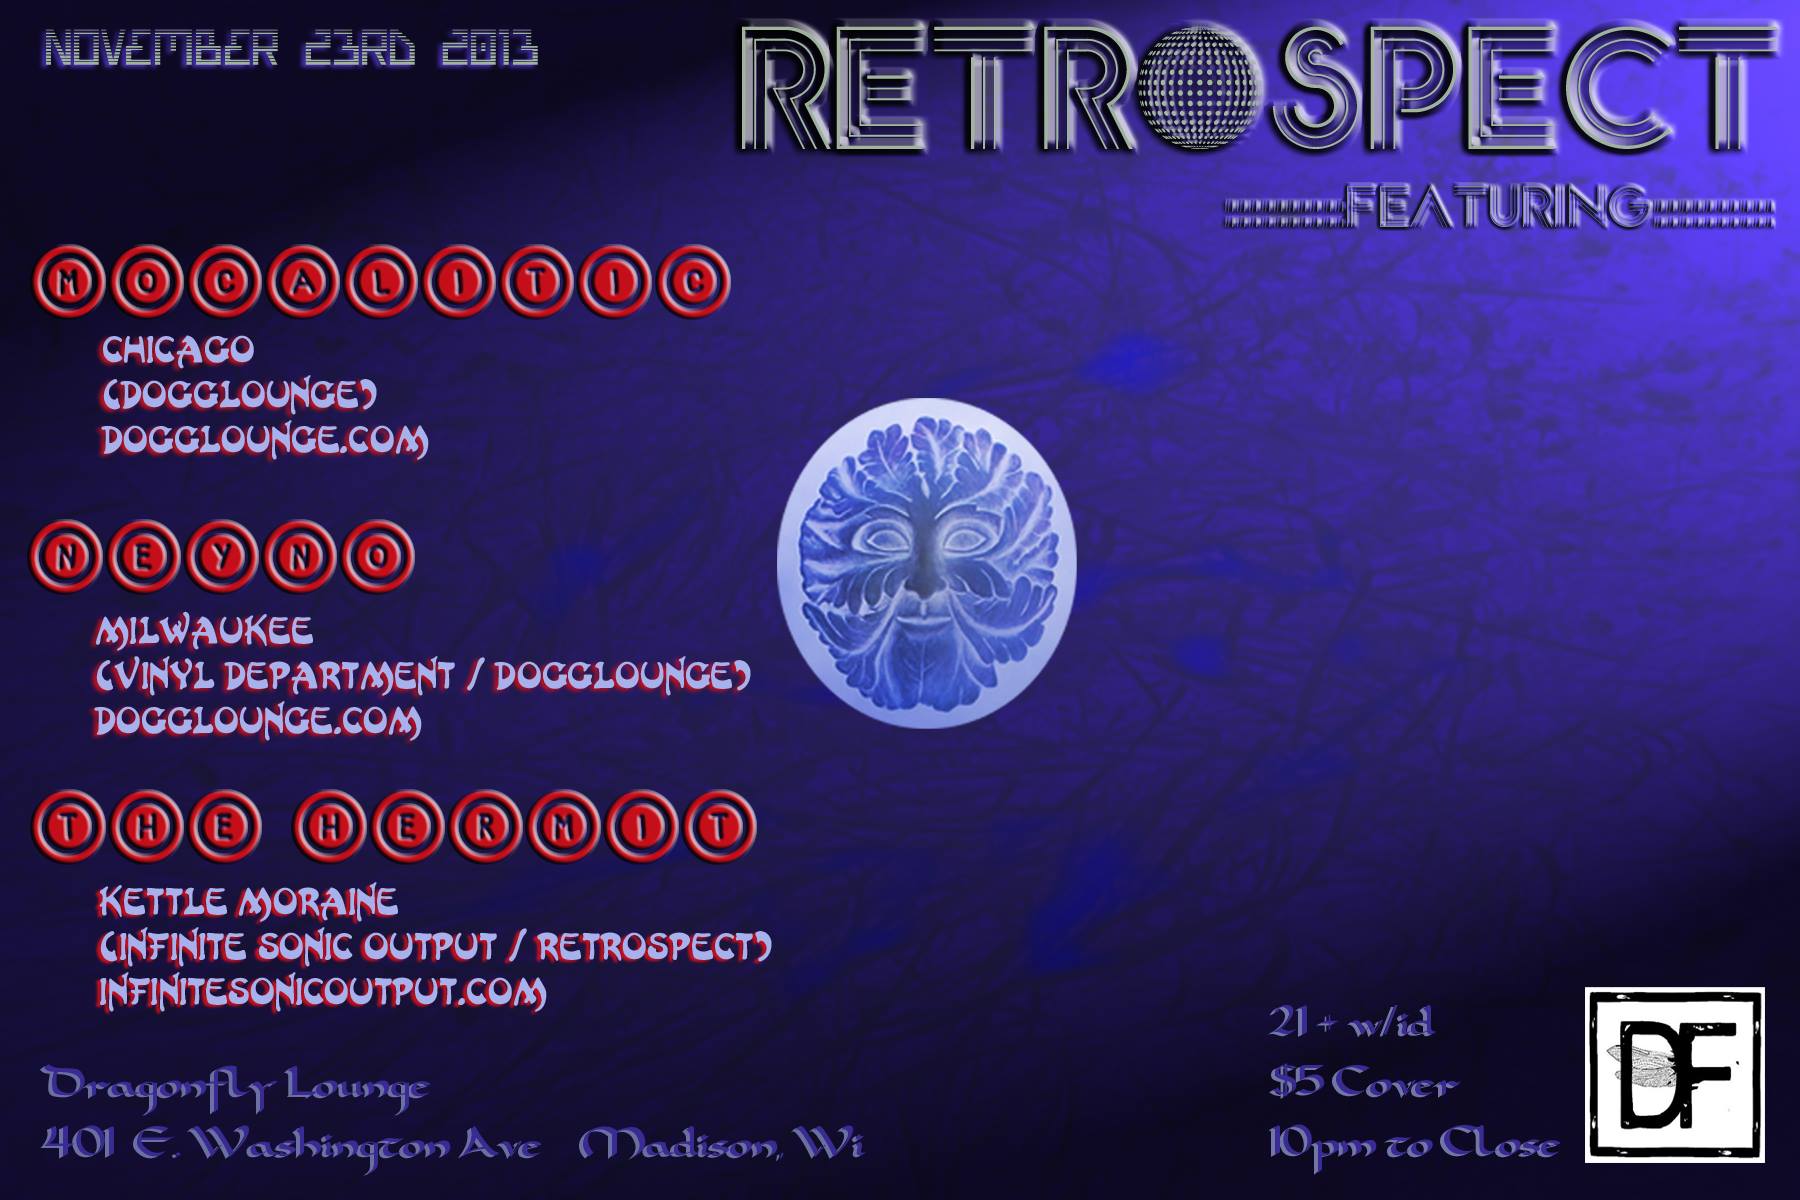 Retrospect - featuring Mocalitic, Neyno and The Hermit